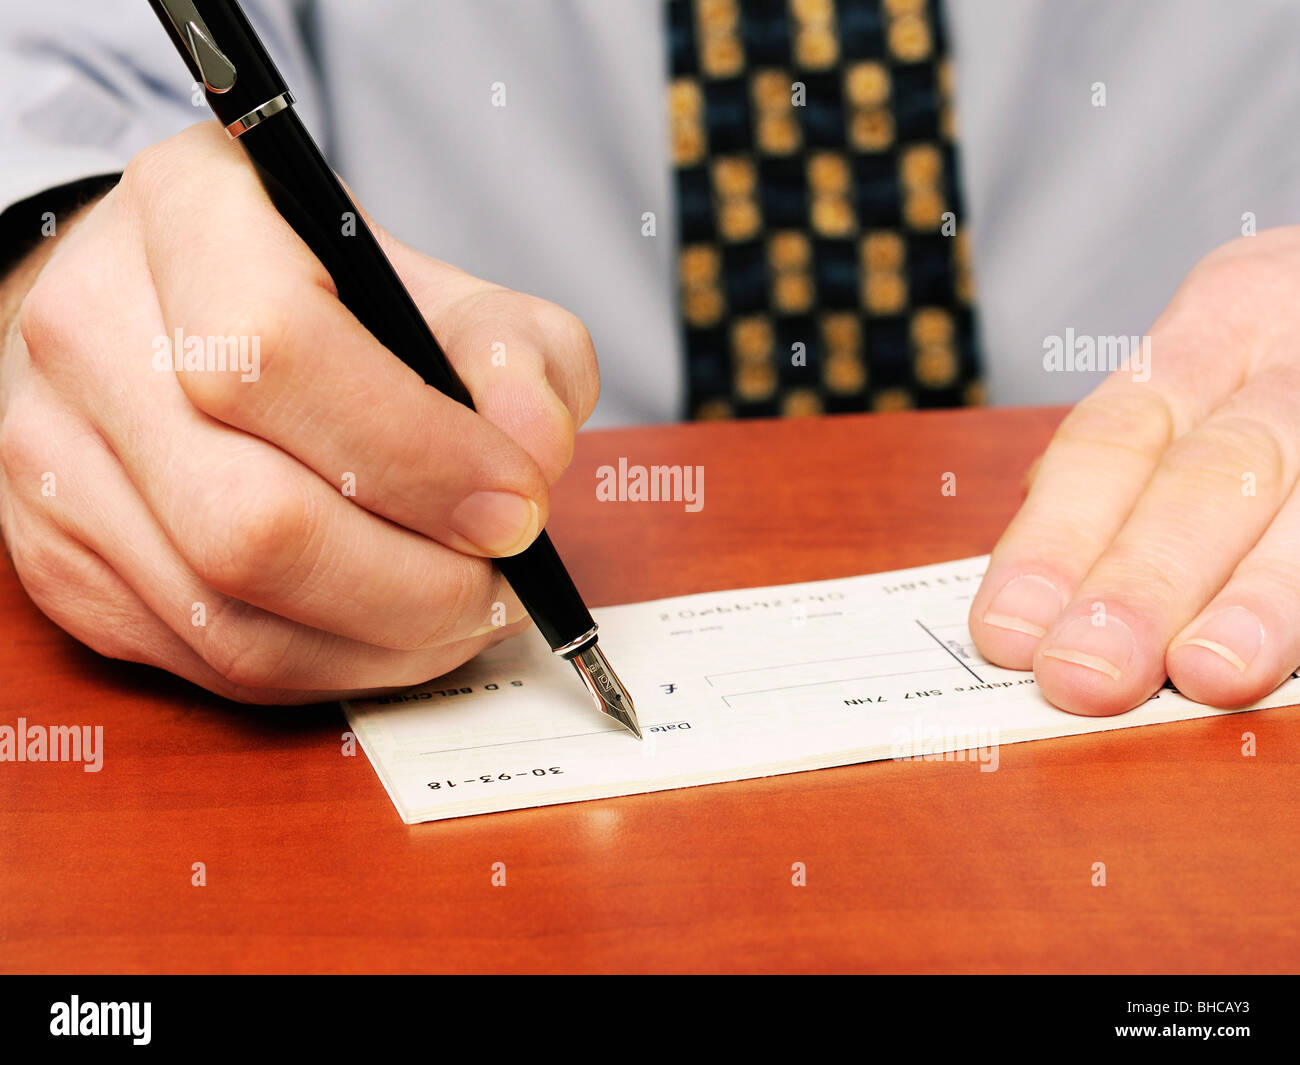 Writing a Cheque Stock Photo